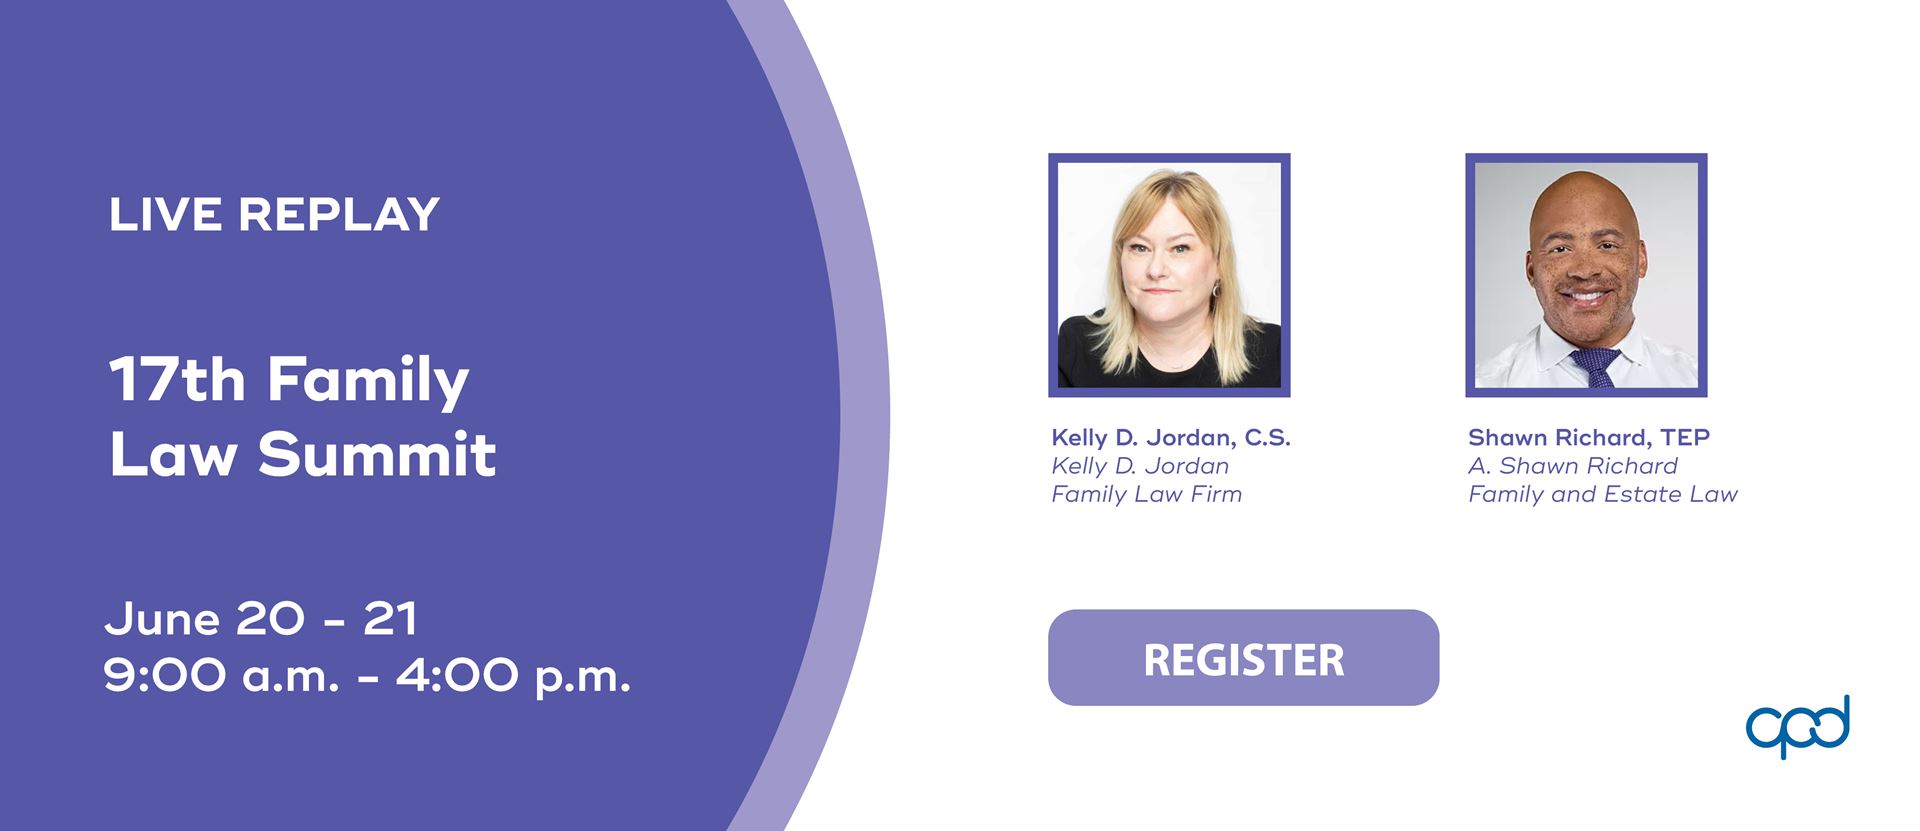 Live Replay: 17th Family Law Summit